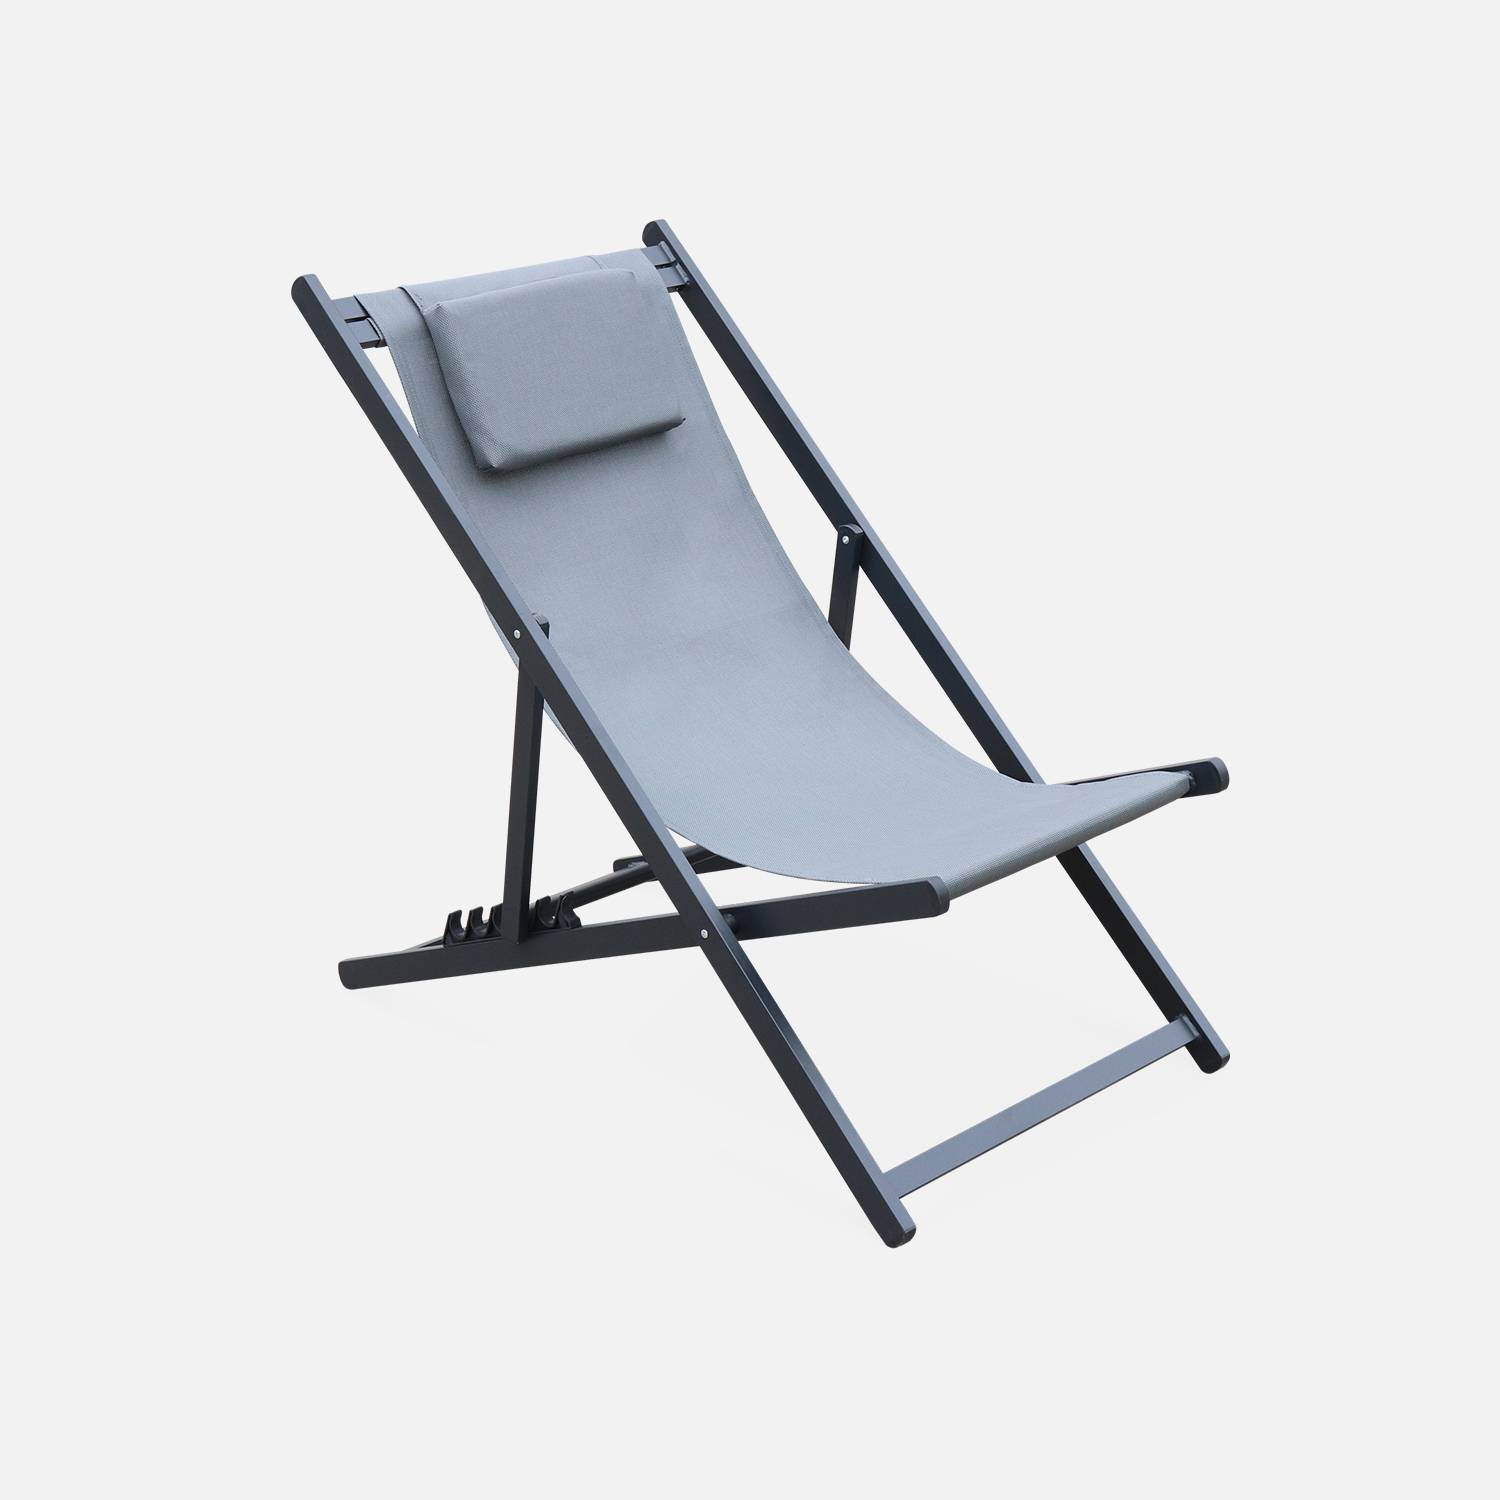 Set of 2 sun loungers - adjustable deck chairs with headrests made from aluminium frame - Gaia - Anthracite frame, Grey textilene Photo3